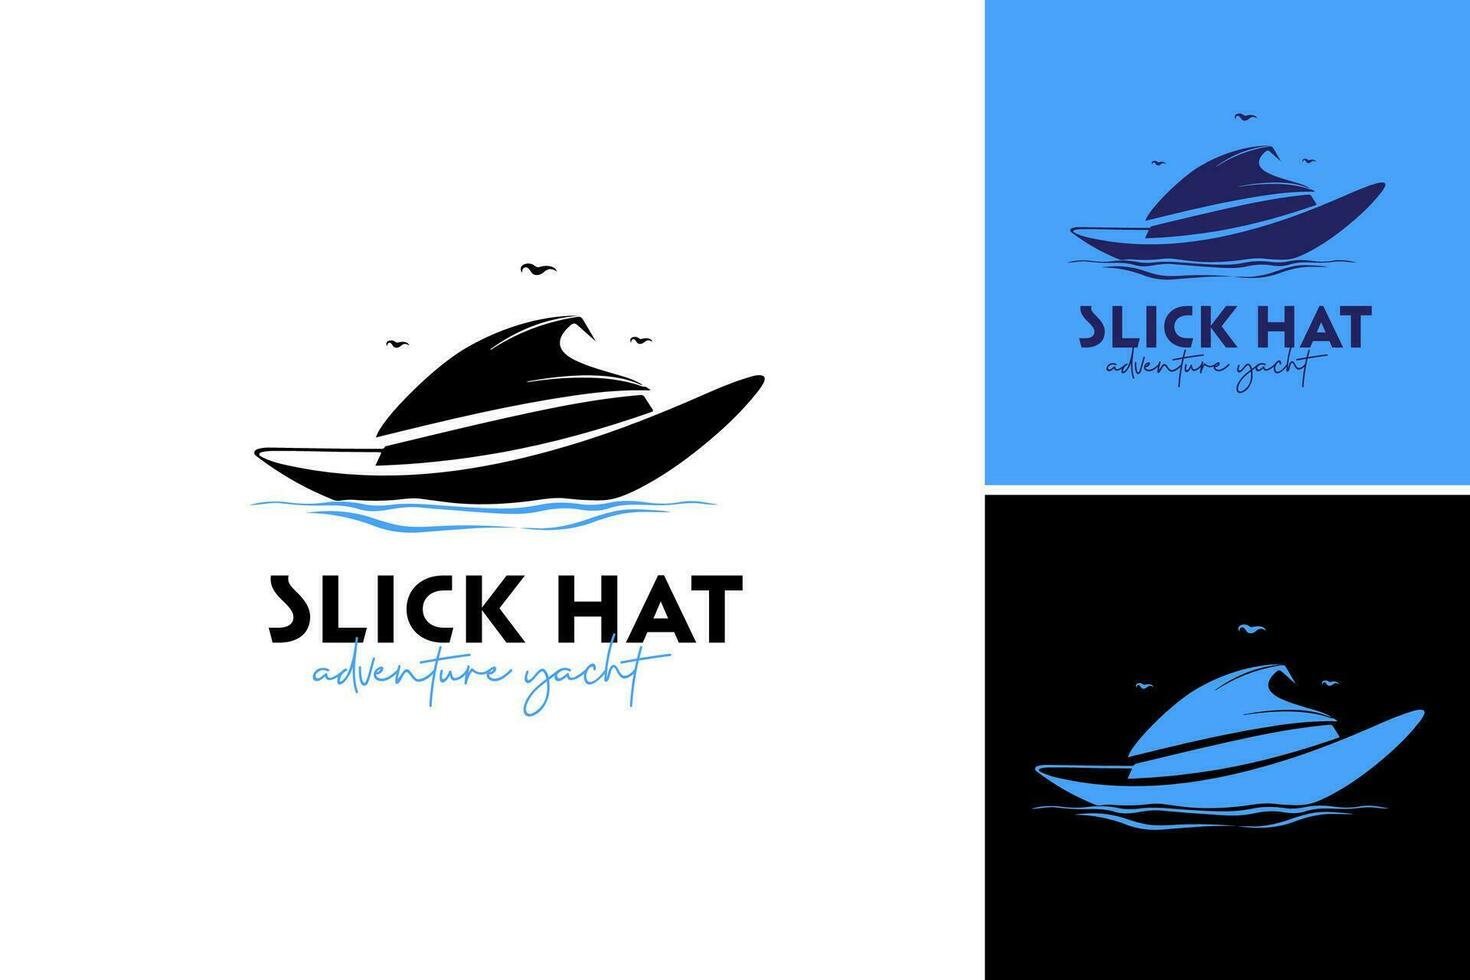 Slick Hat Adventure Yacht logo design that features a boat floating in water. This asset is suitable for businesses or organizations related to maritime activities, travel, adventure, vector